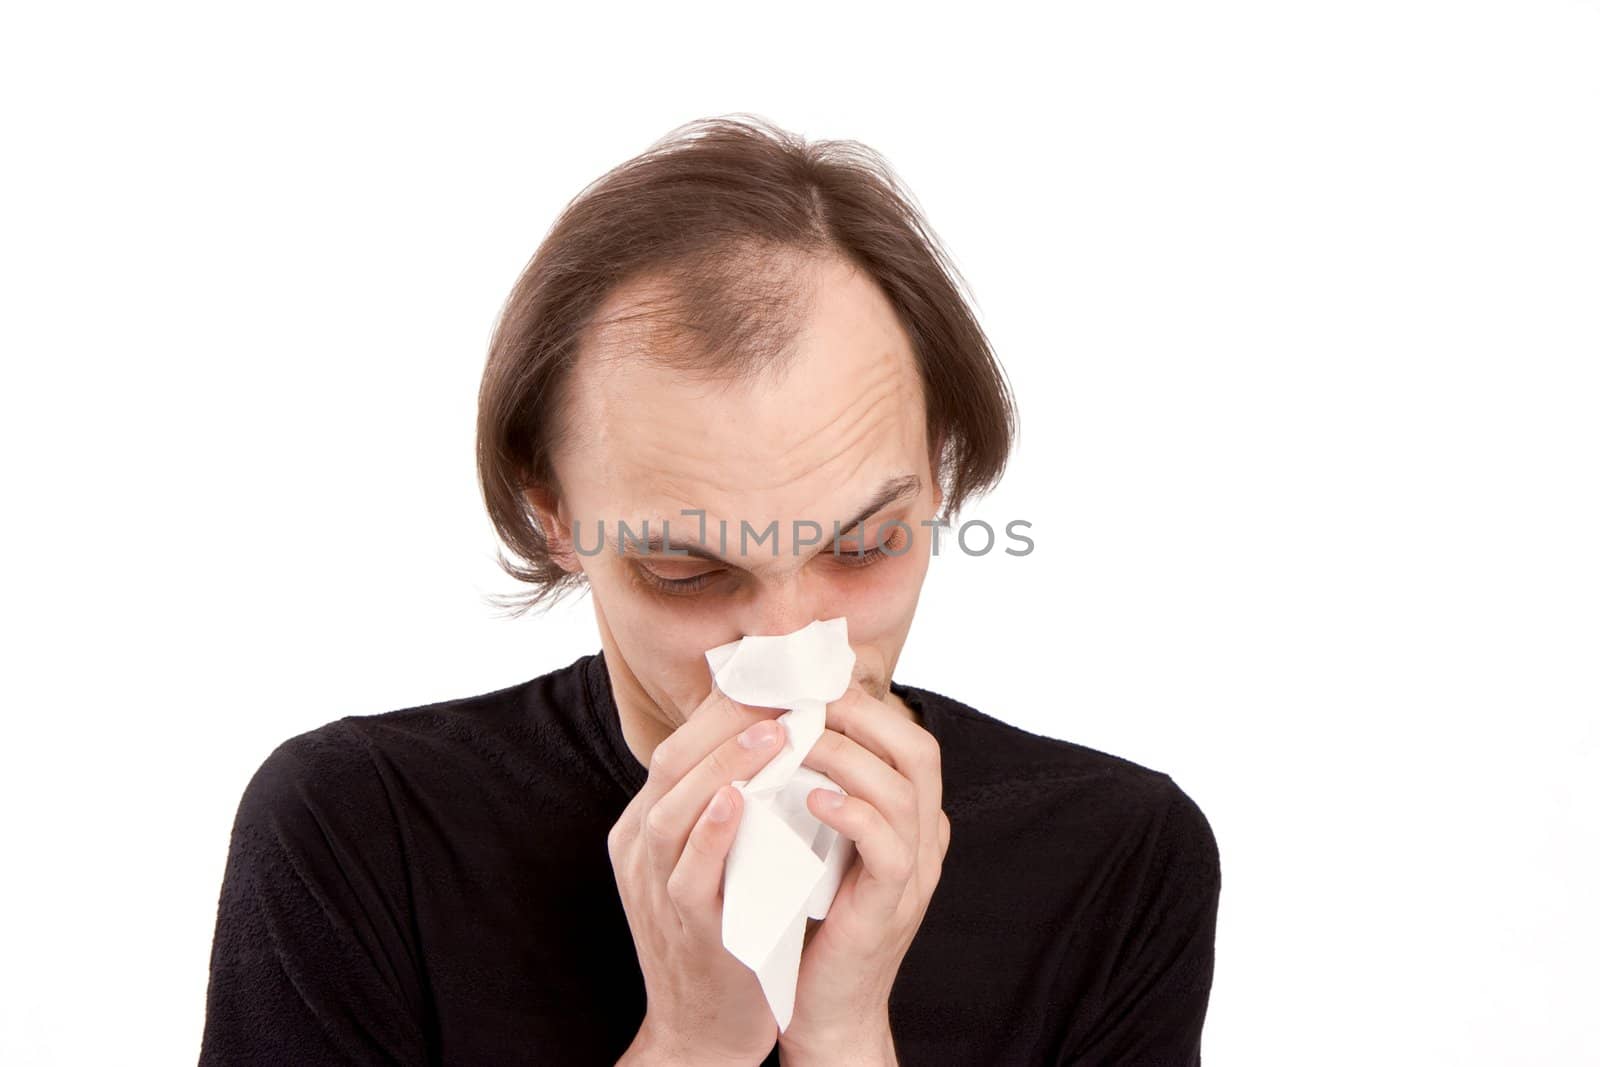 The man sneezes in a white paper handkerchief